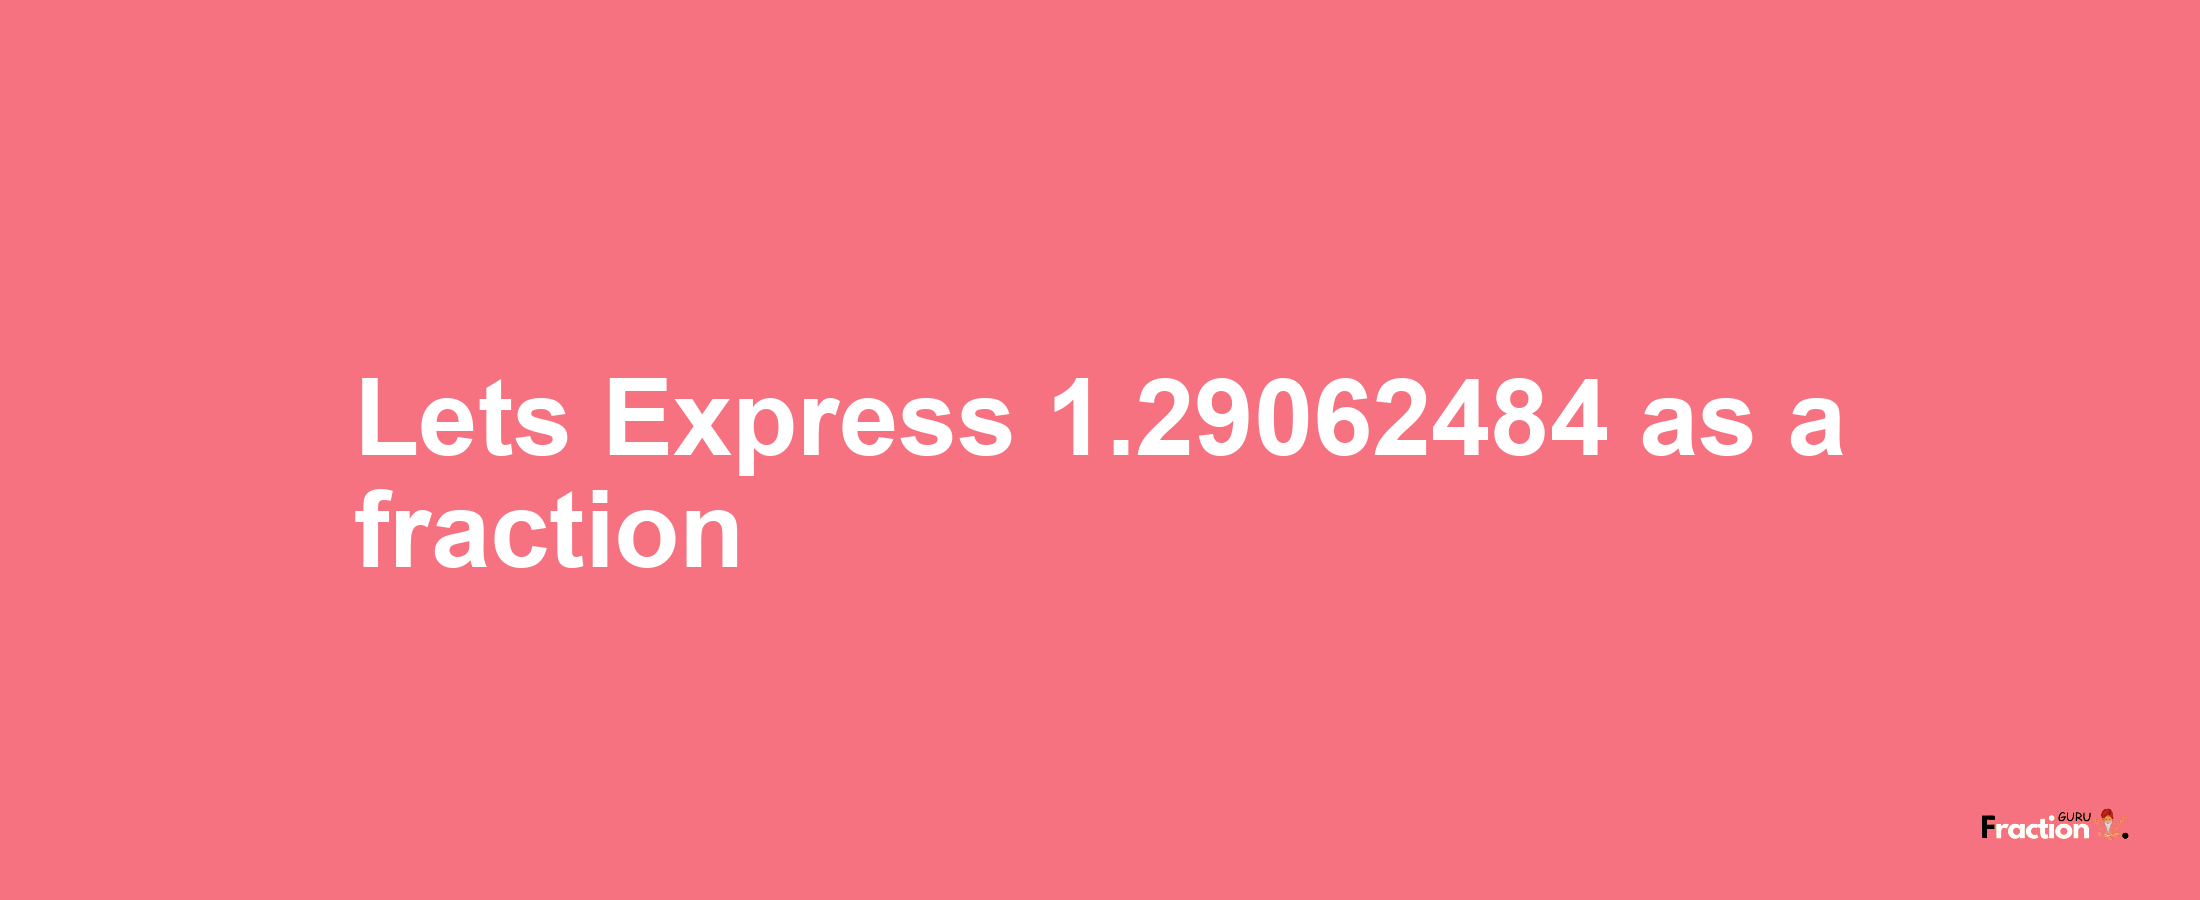 Lets Express 1.29062484 as afraction